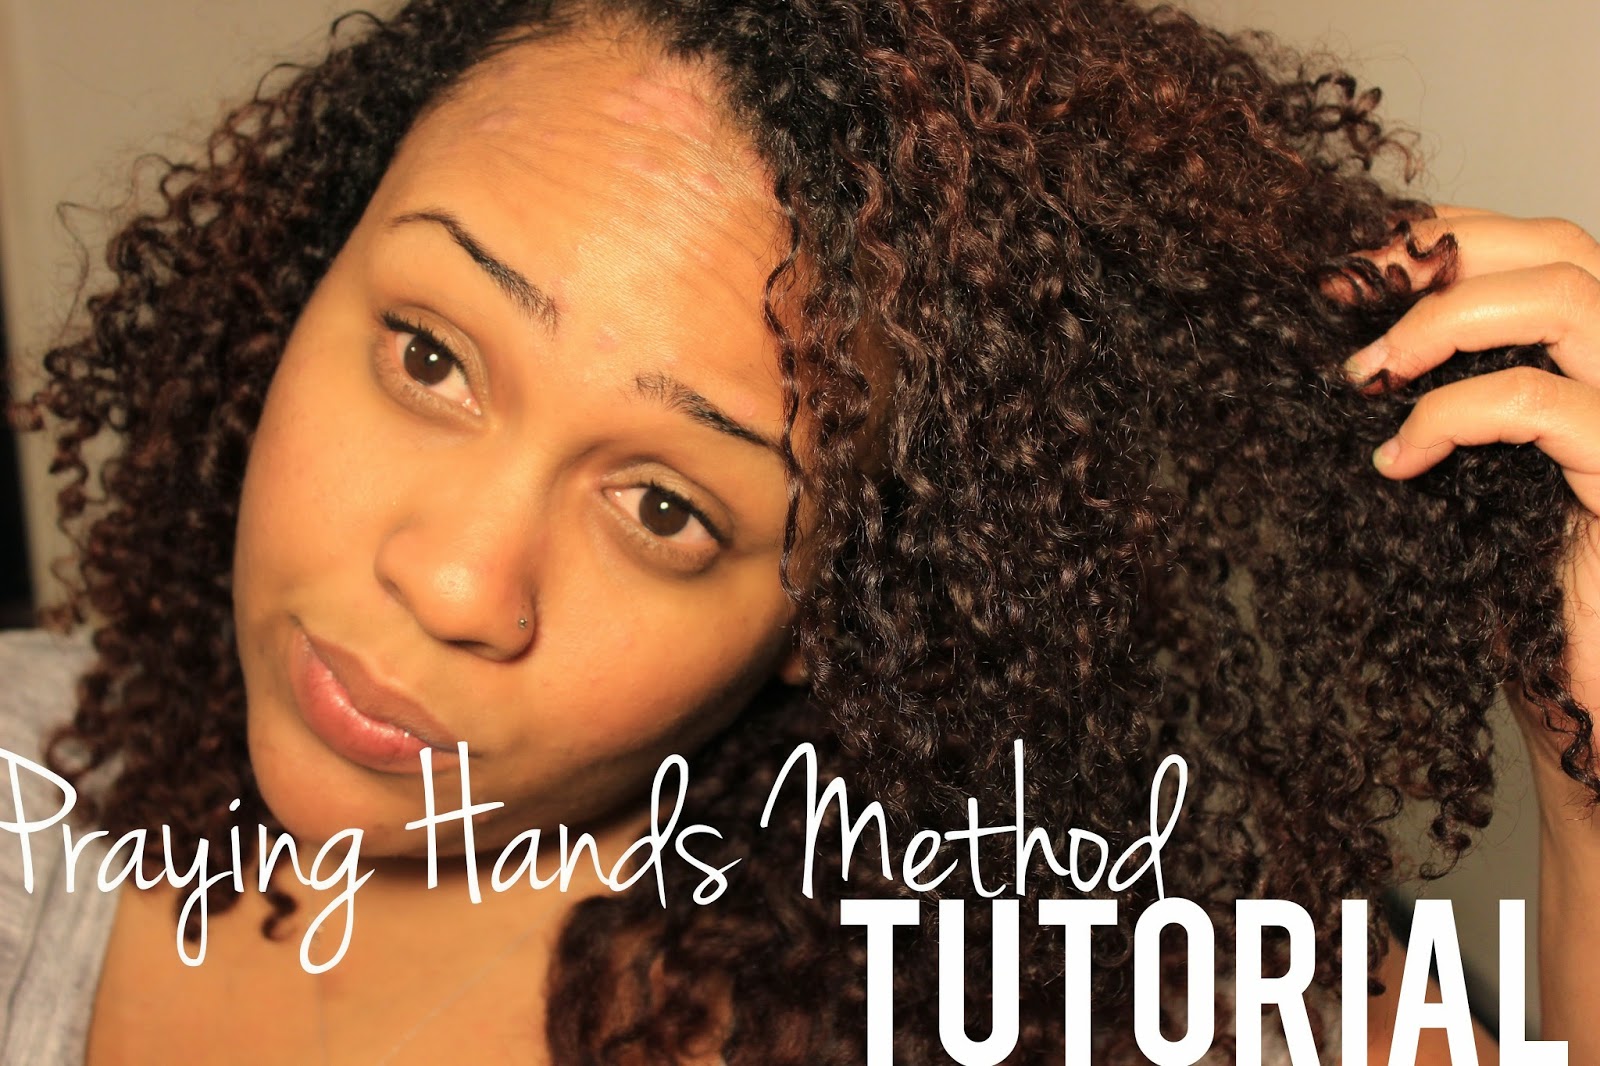 Tutorial: The Praying Hands Method for Smooth Curls with Less Frizz